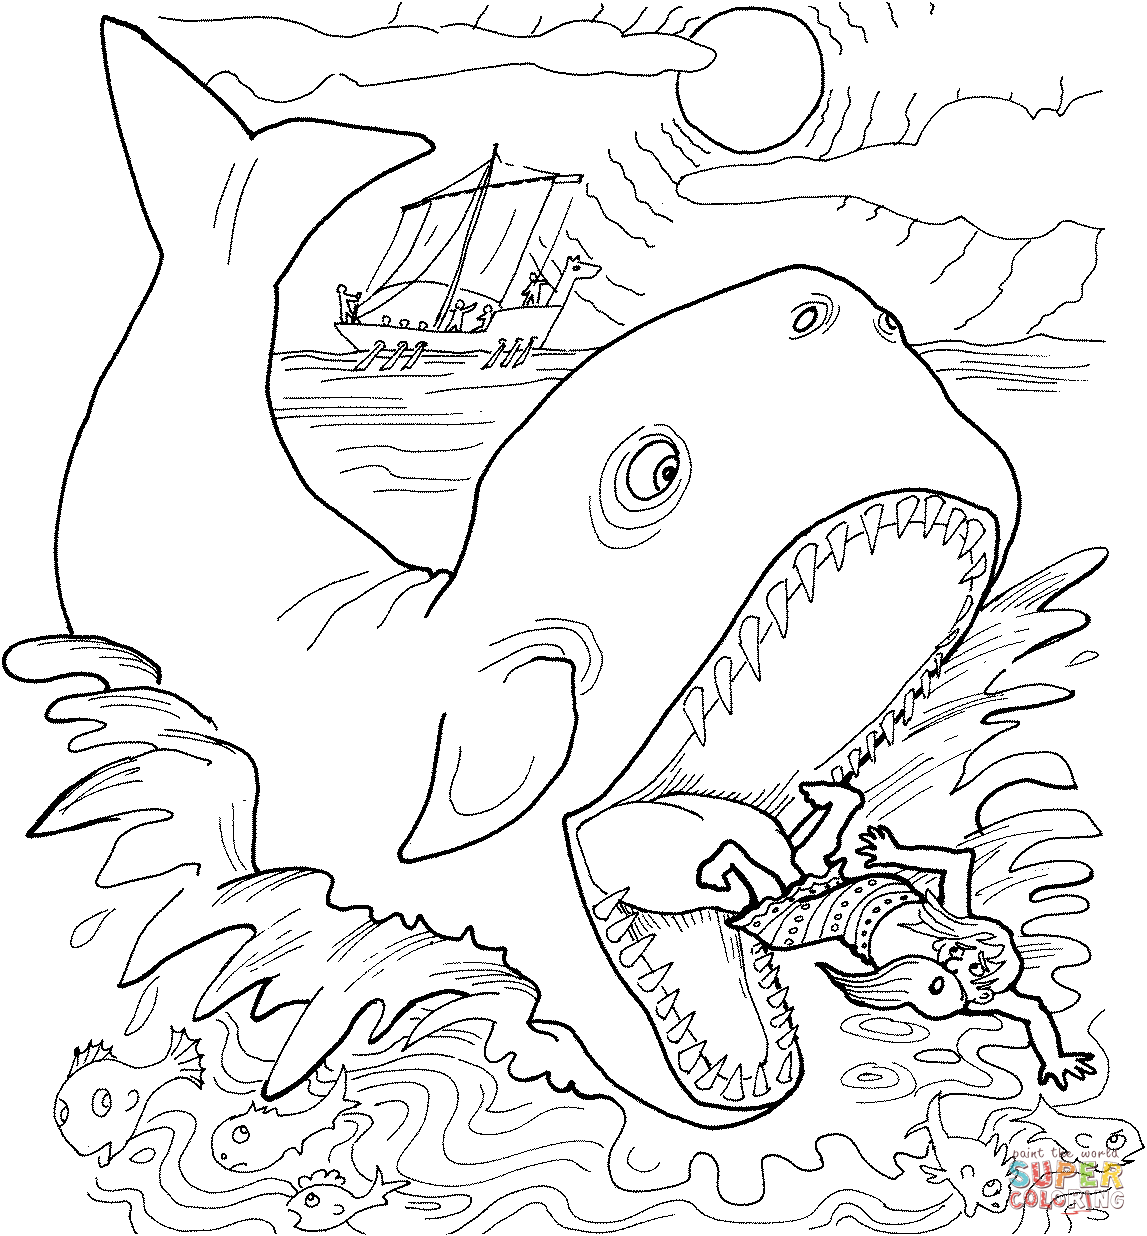 Jonah and the Whale coloring page | Free Printable Coloring Pages